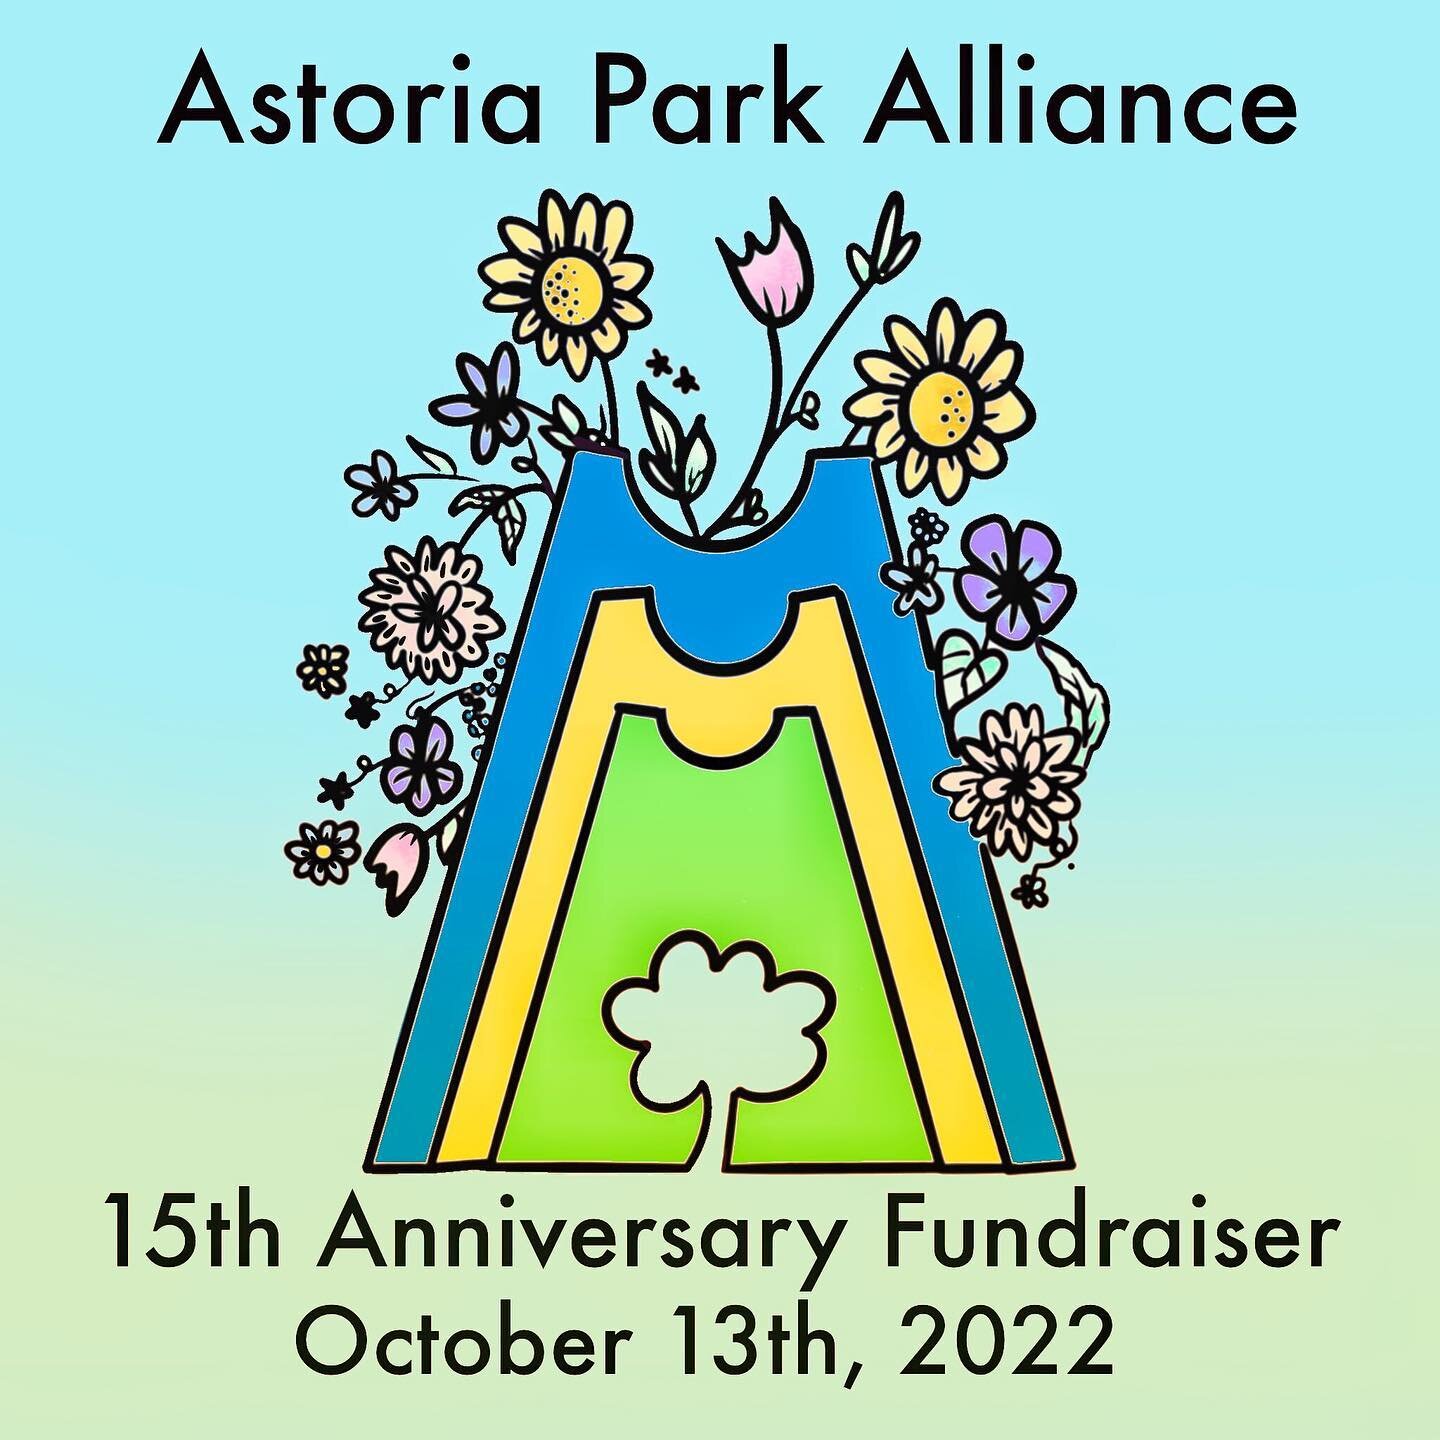 YOU'RE INVITED! 

The Astoria Park Alliance Fundraiser is back! Join us on October 13th from 6:30-9:30PM at Katch Astoria for a night of games, give-aways, raffle prizes and more! This year we are celebrating 15 years of serving the Astoria Park comm